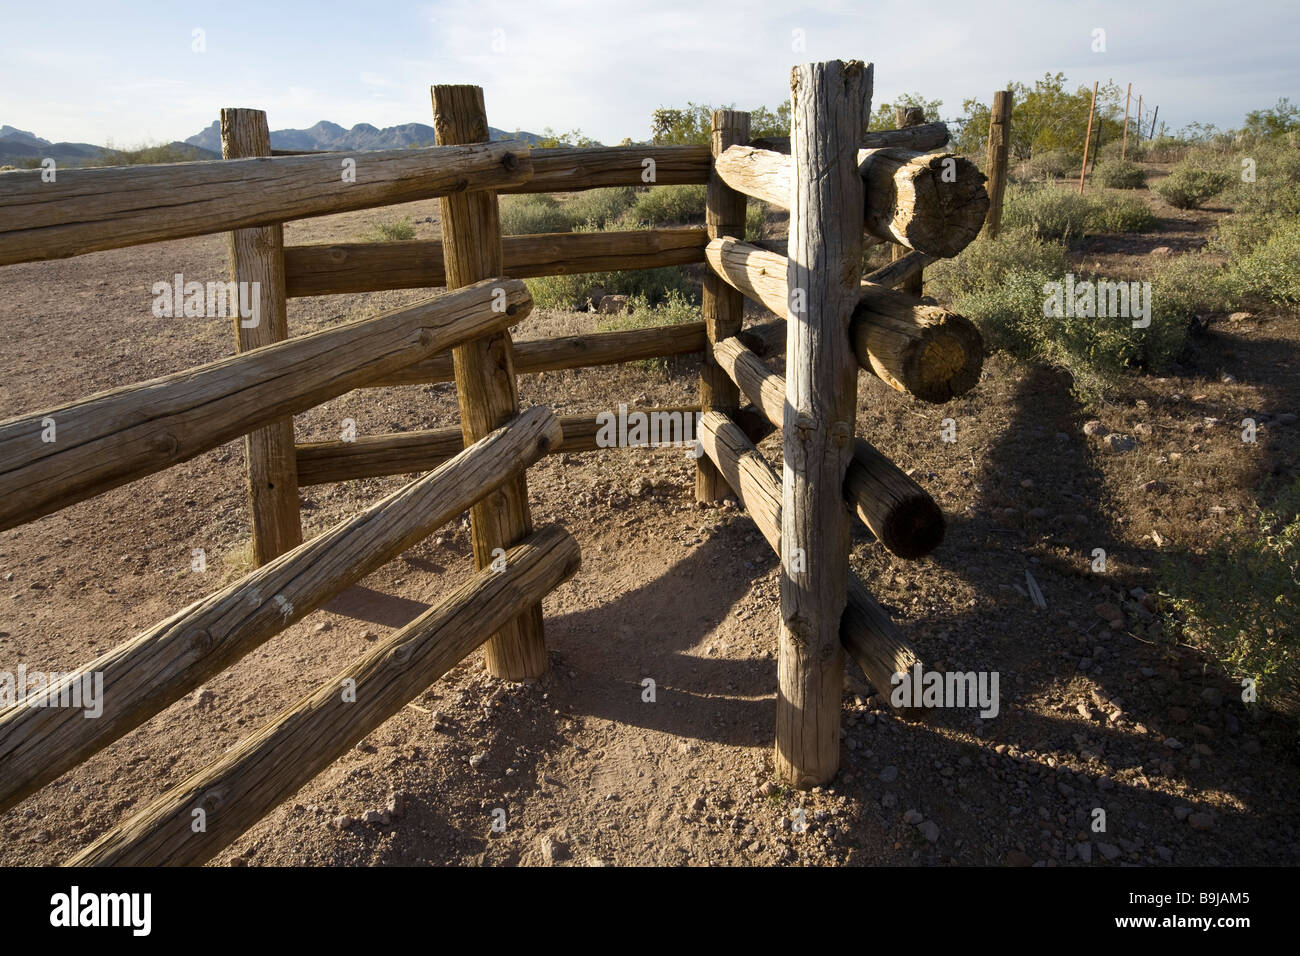 Trail head fence design prevents livestock from escaping and motorized vehicles from entering area Stock Photo